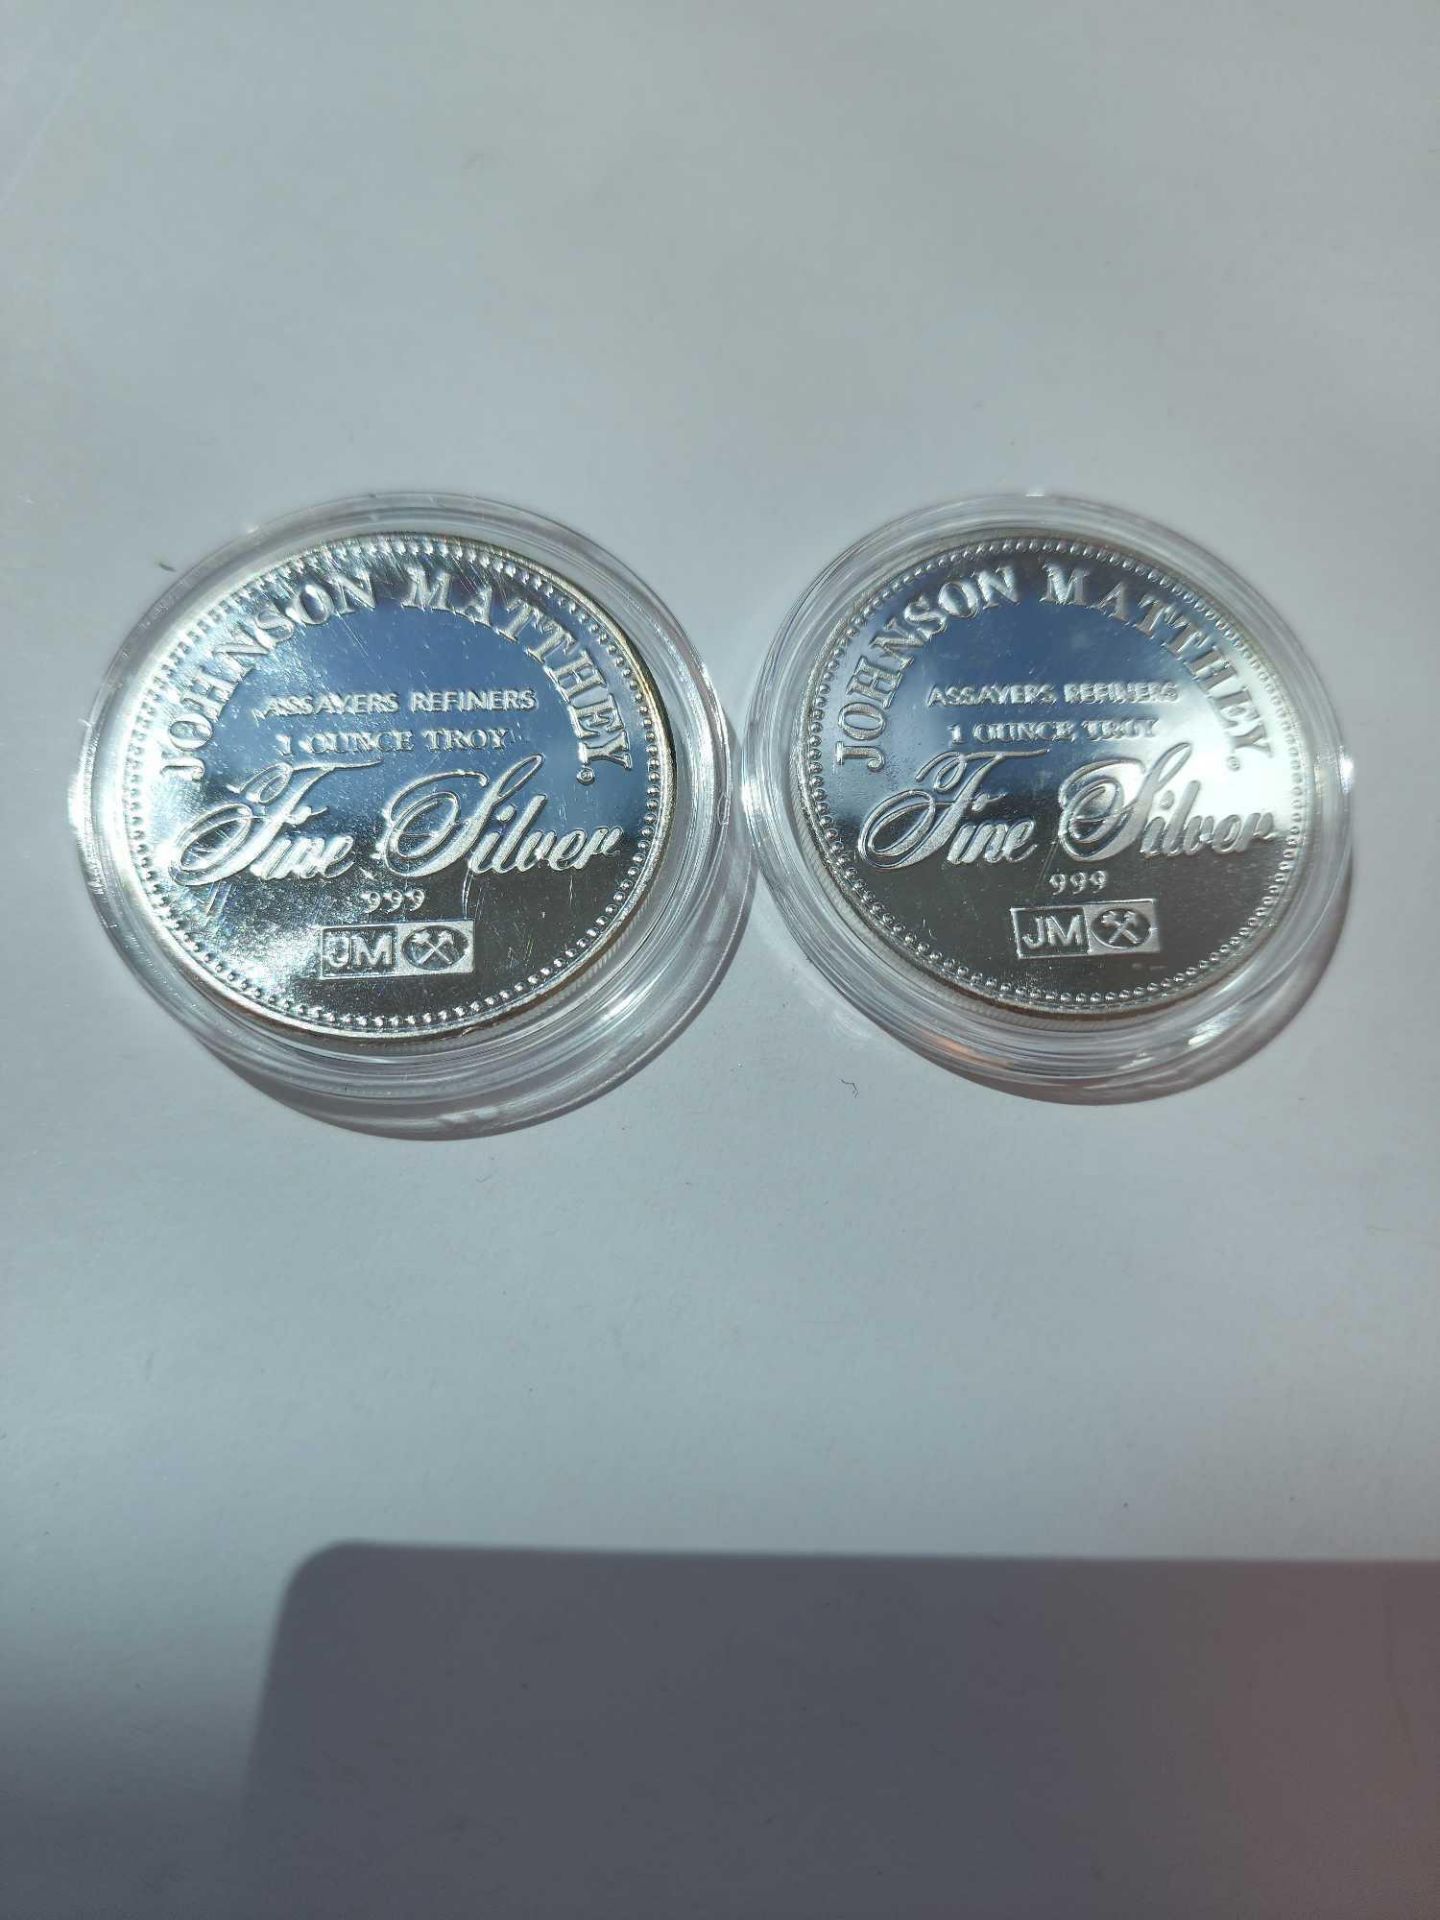 2 freedom to vote silver coins - Image 3 of 3